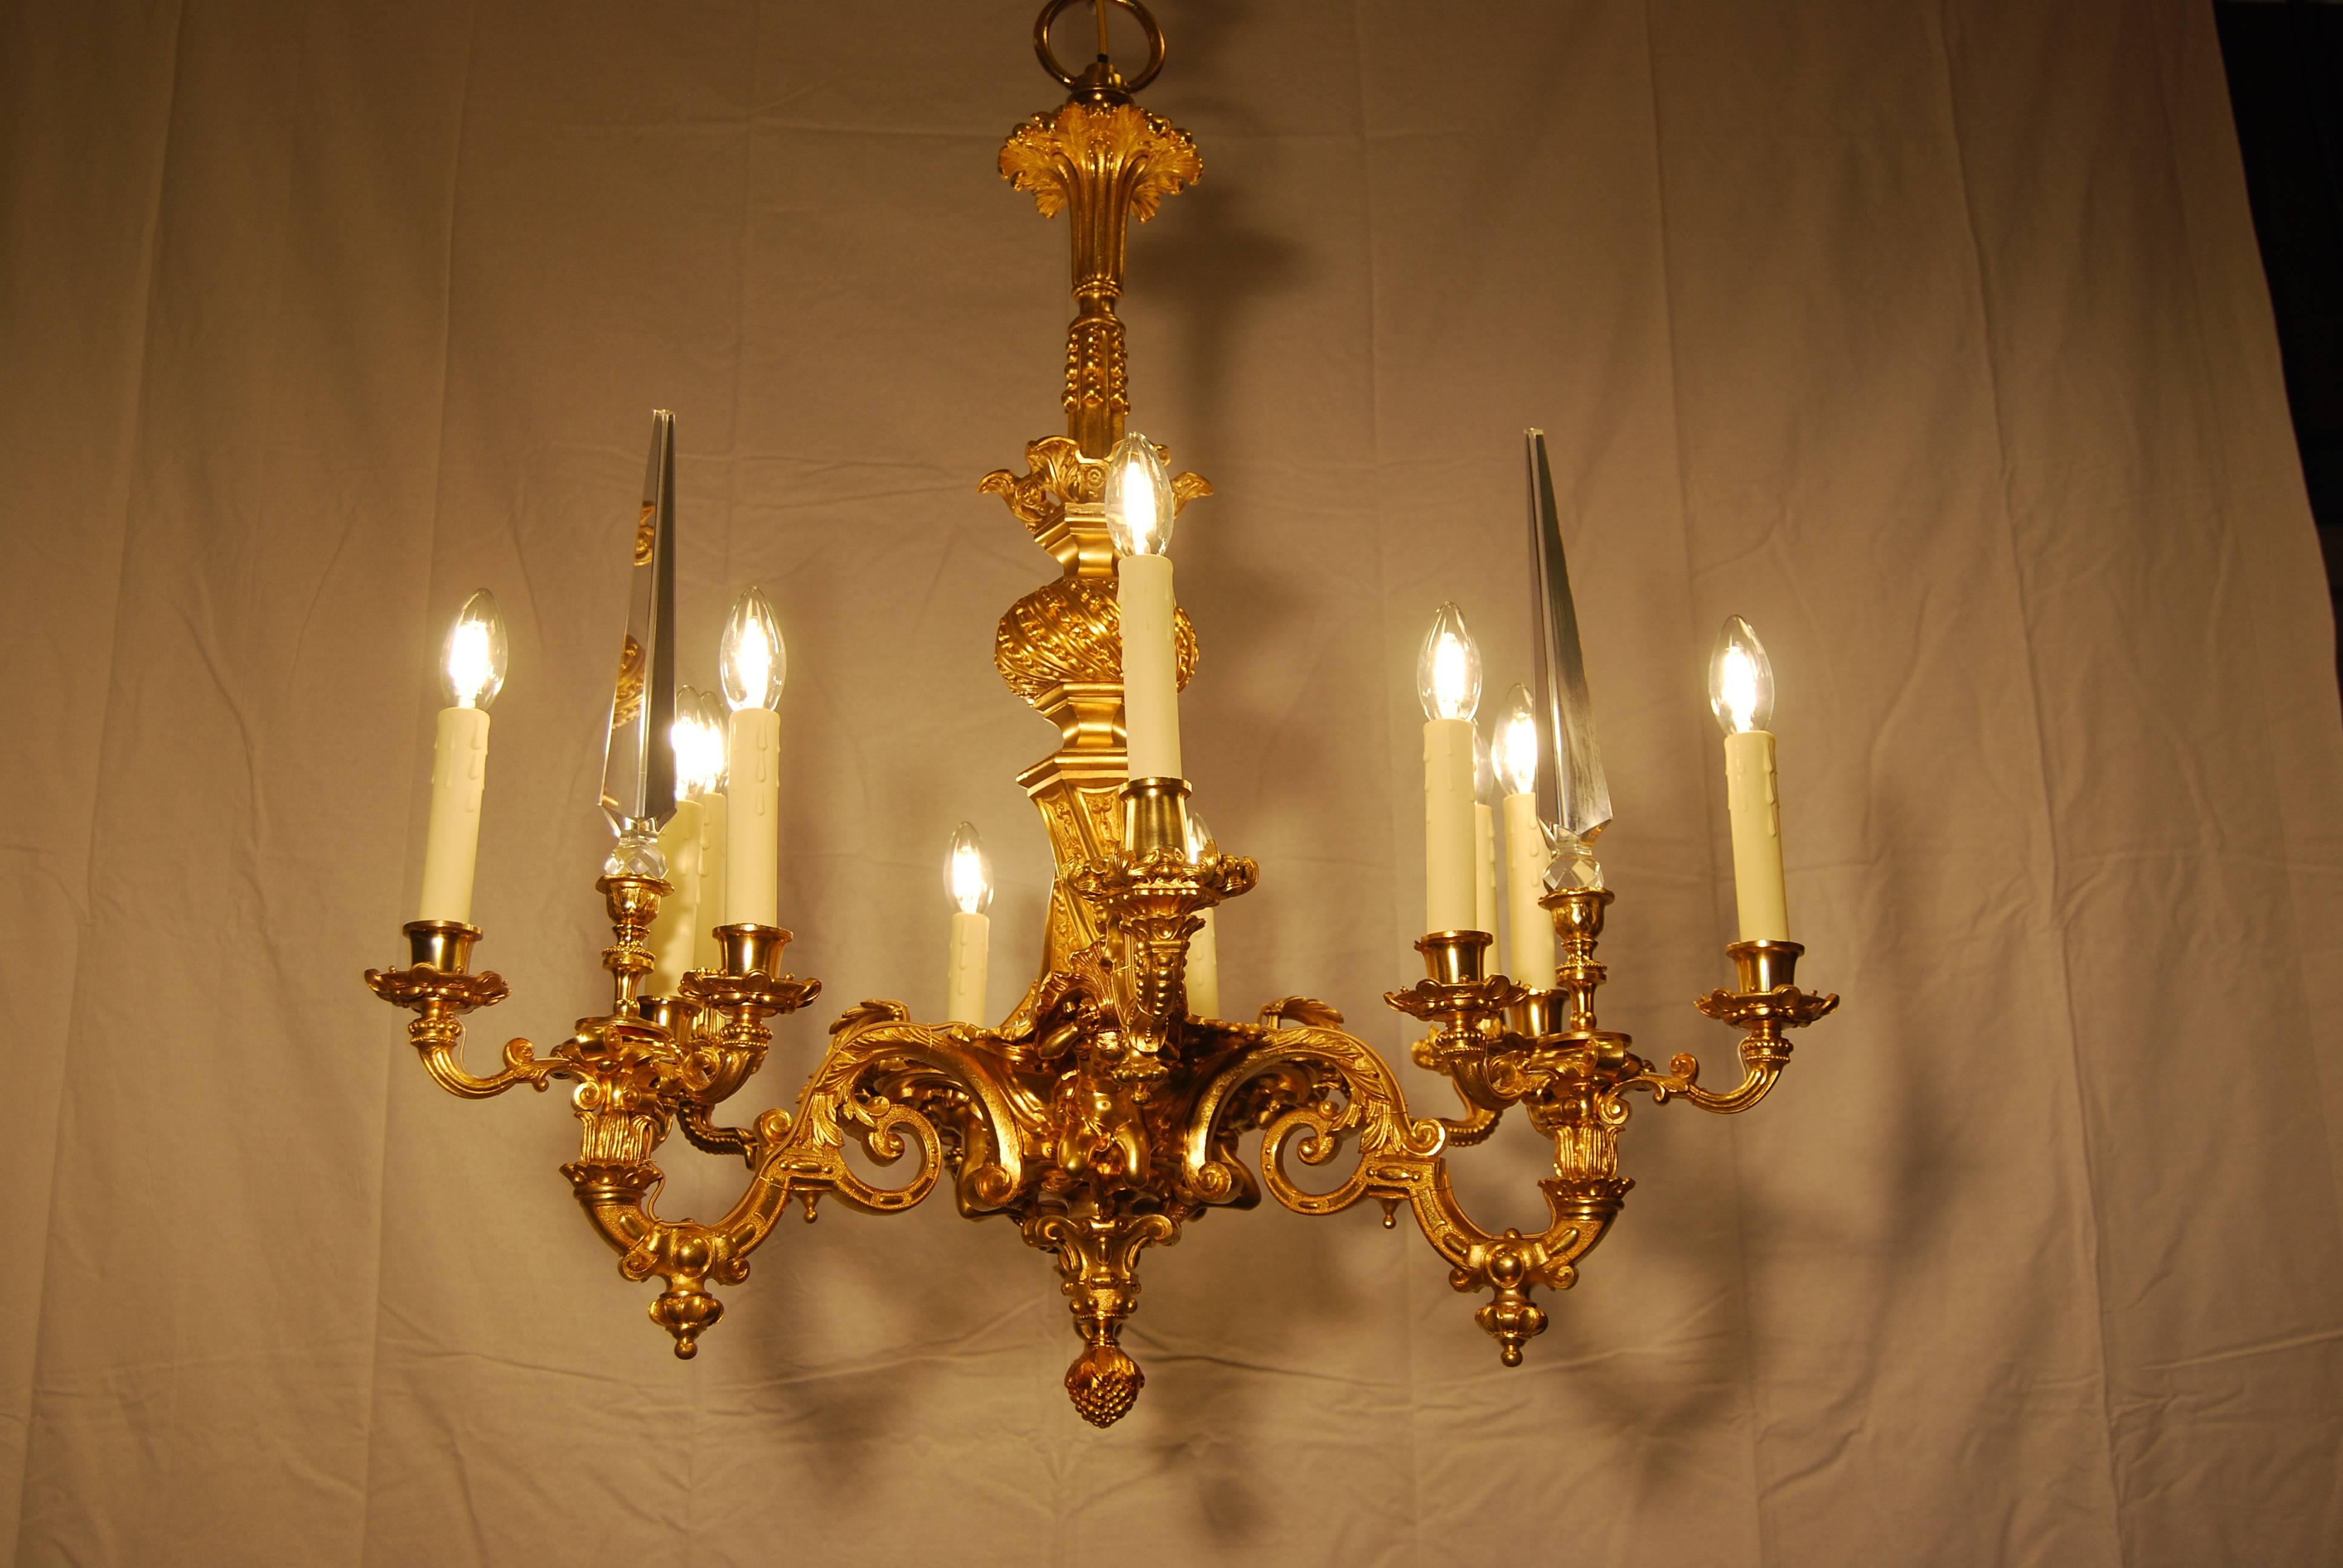 This is an unique twelve-light Ormolu Louis XV chandelier.
Three cherubs are holding the chandelier at the lower part.
Cast bronze and fire gilded ornaments.
Intended for candles and later converted to electricity.
Three crystal hand cut